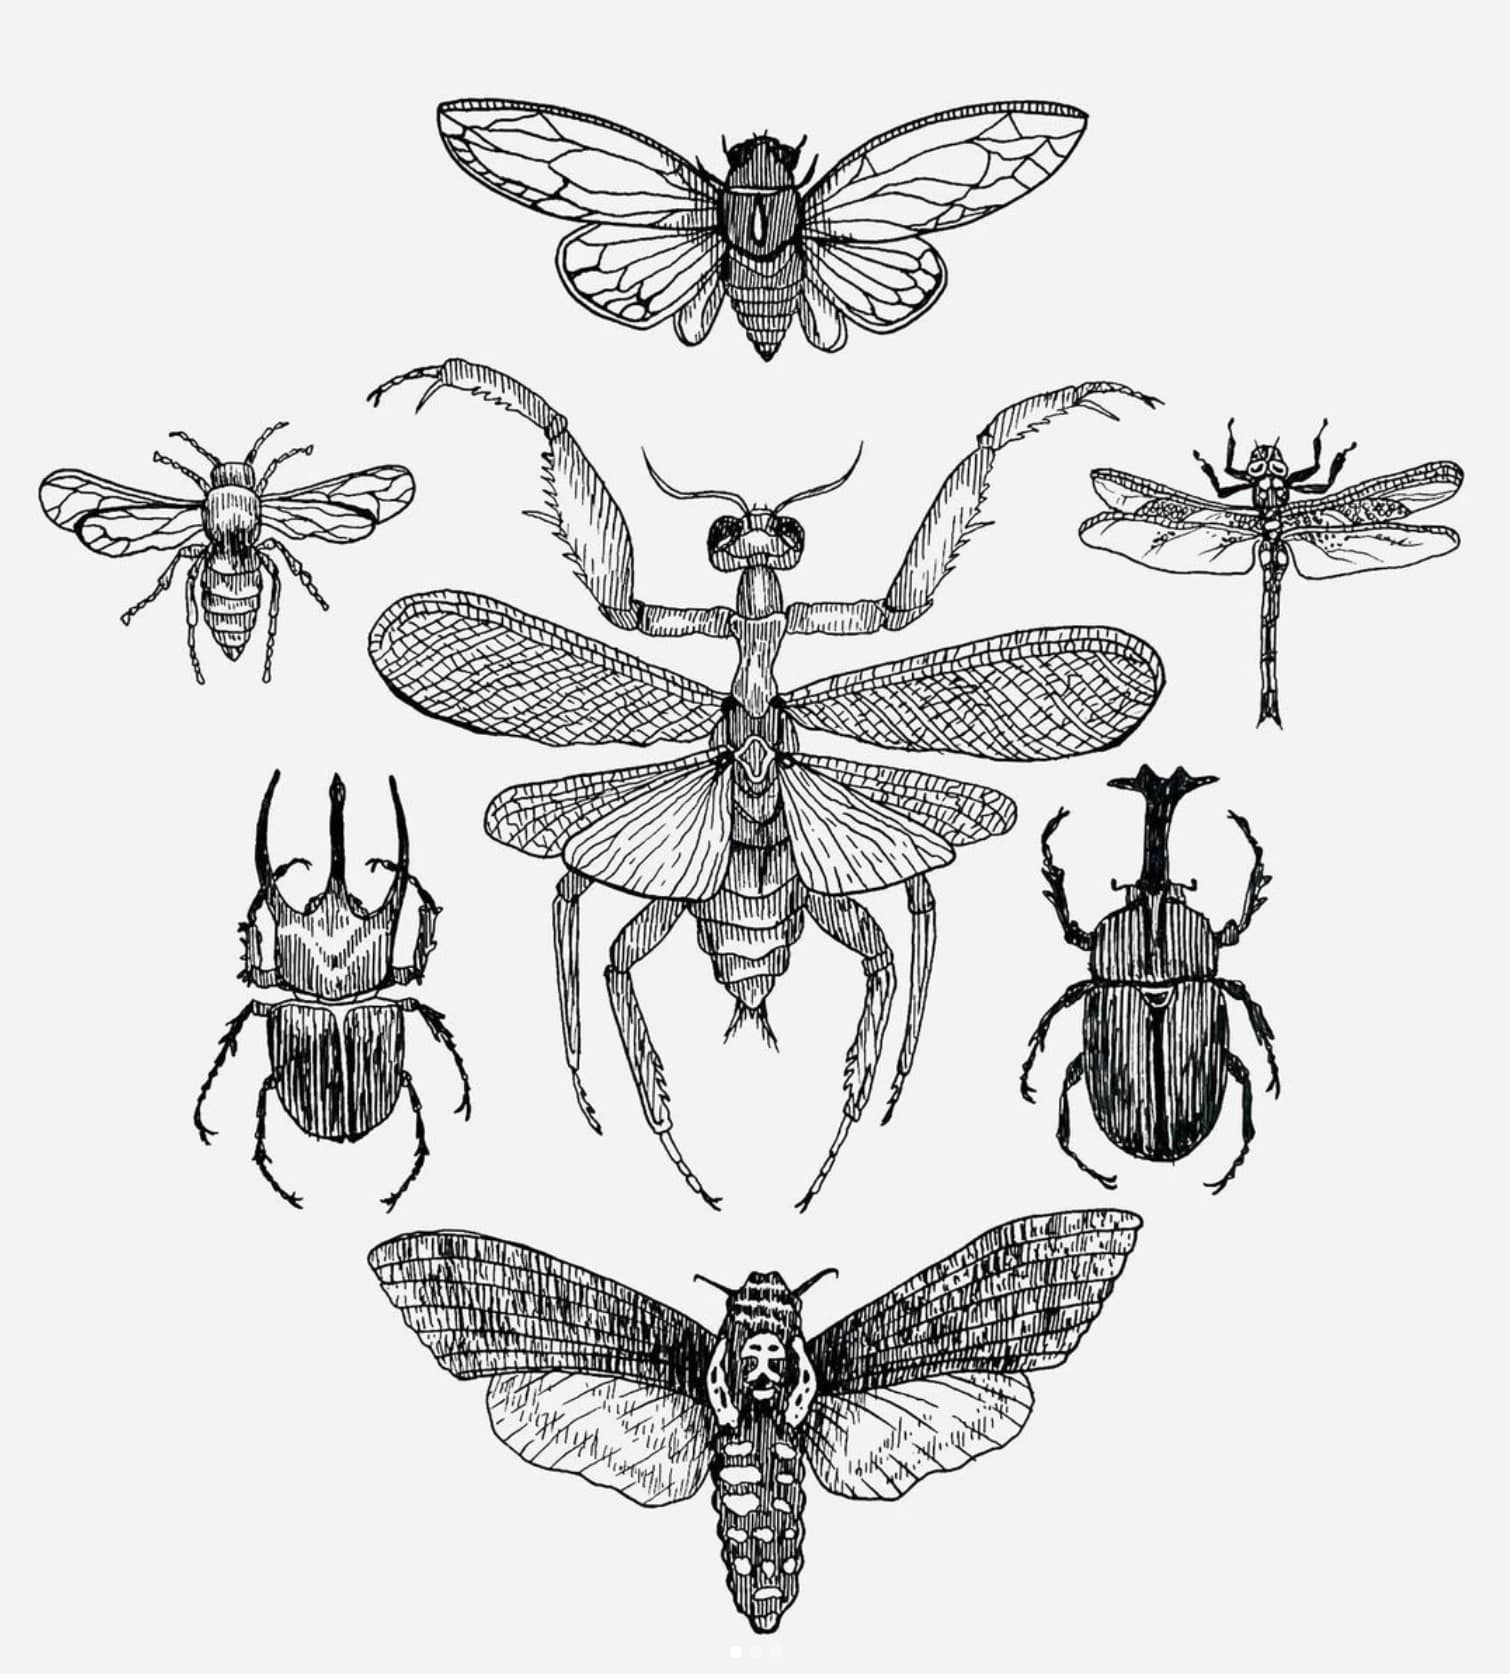 Drawings of insects